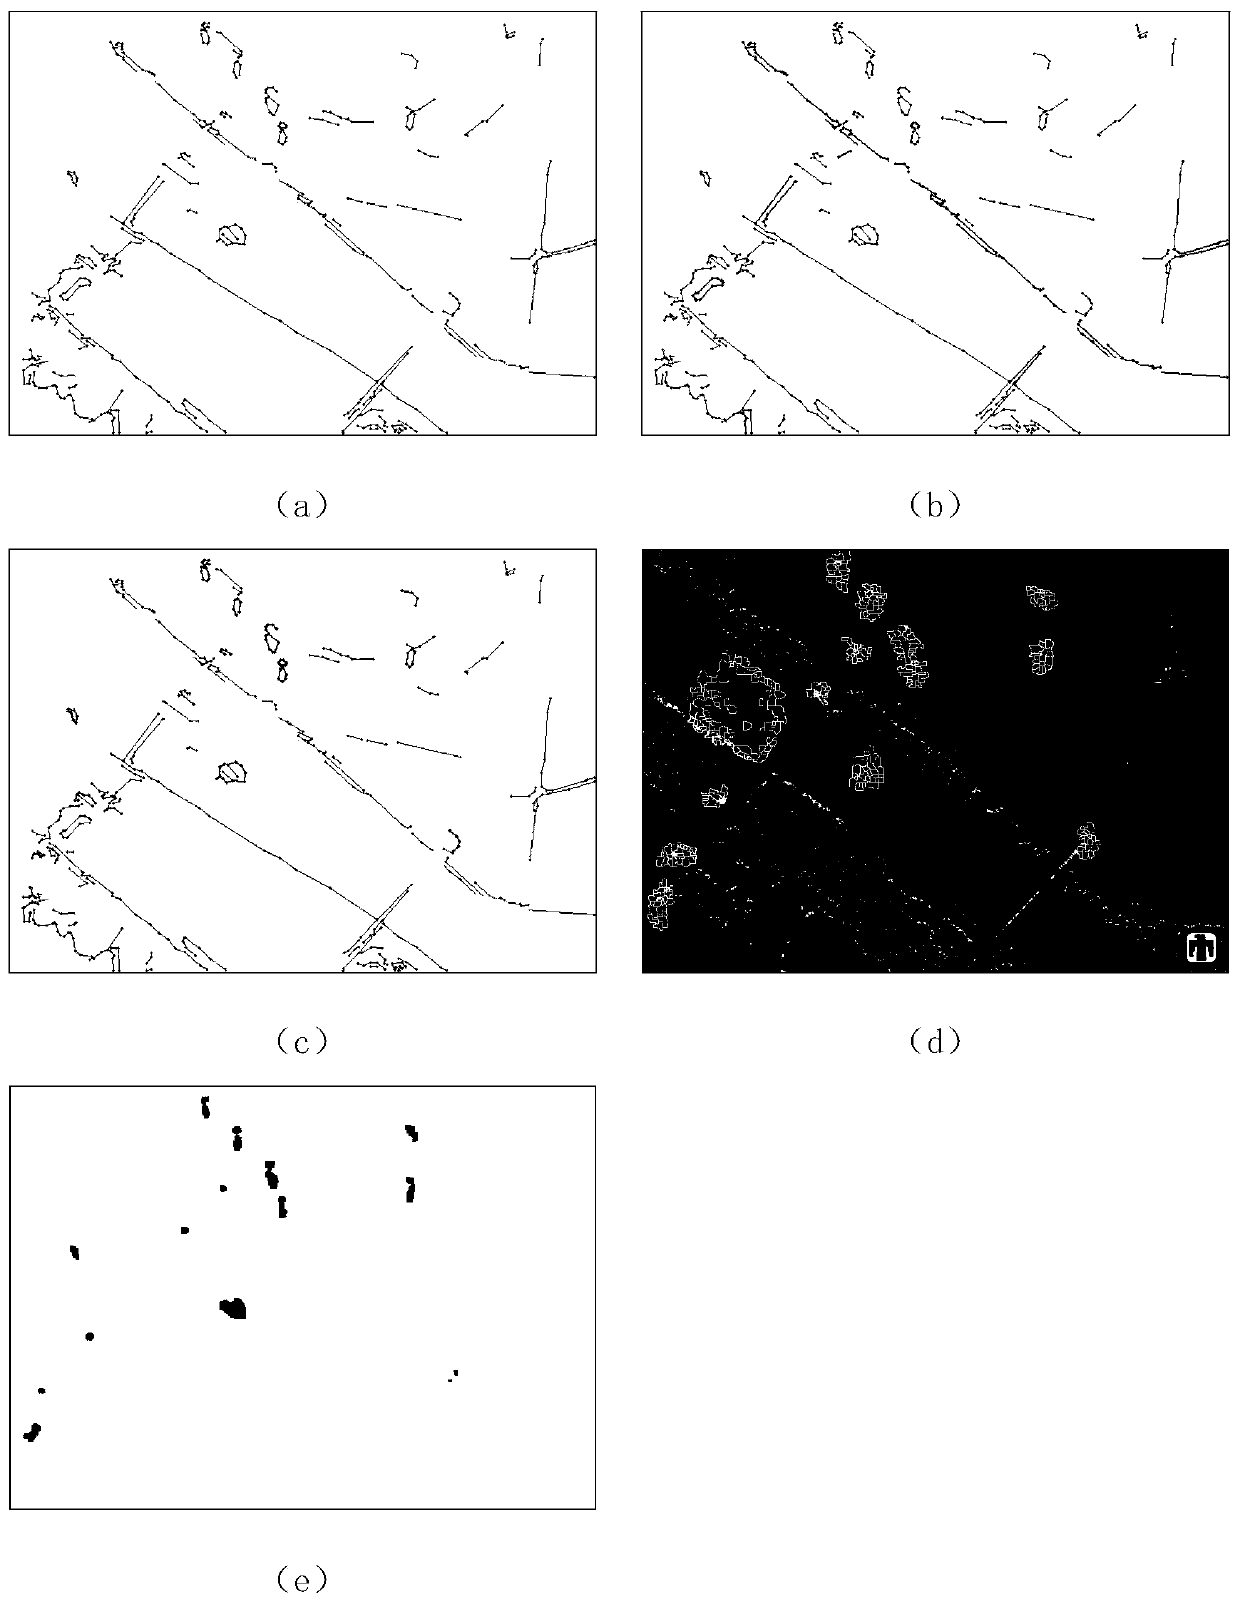 SAR Image Segmentation Method Based on Curvelet Filter and Convolution Structure Learning